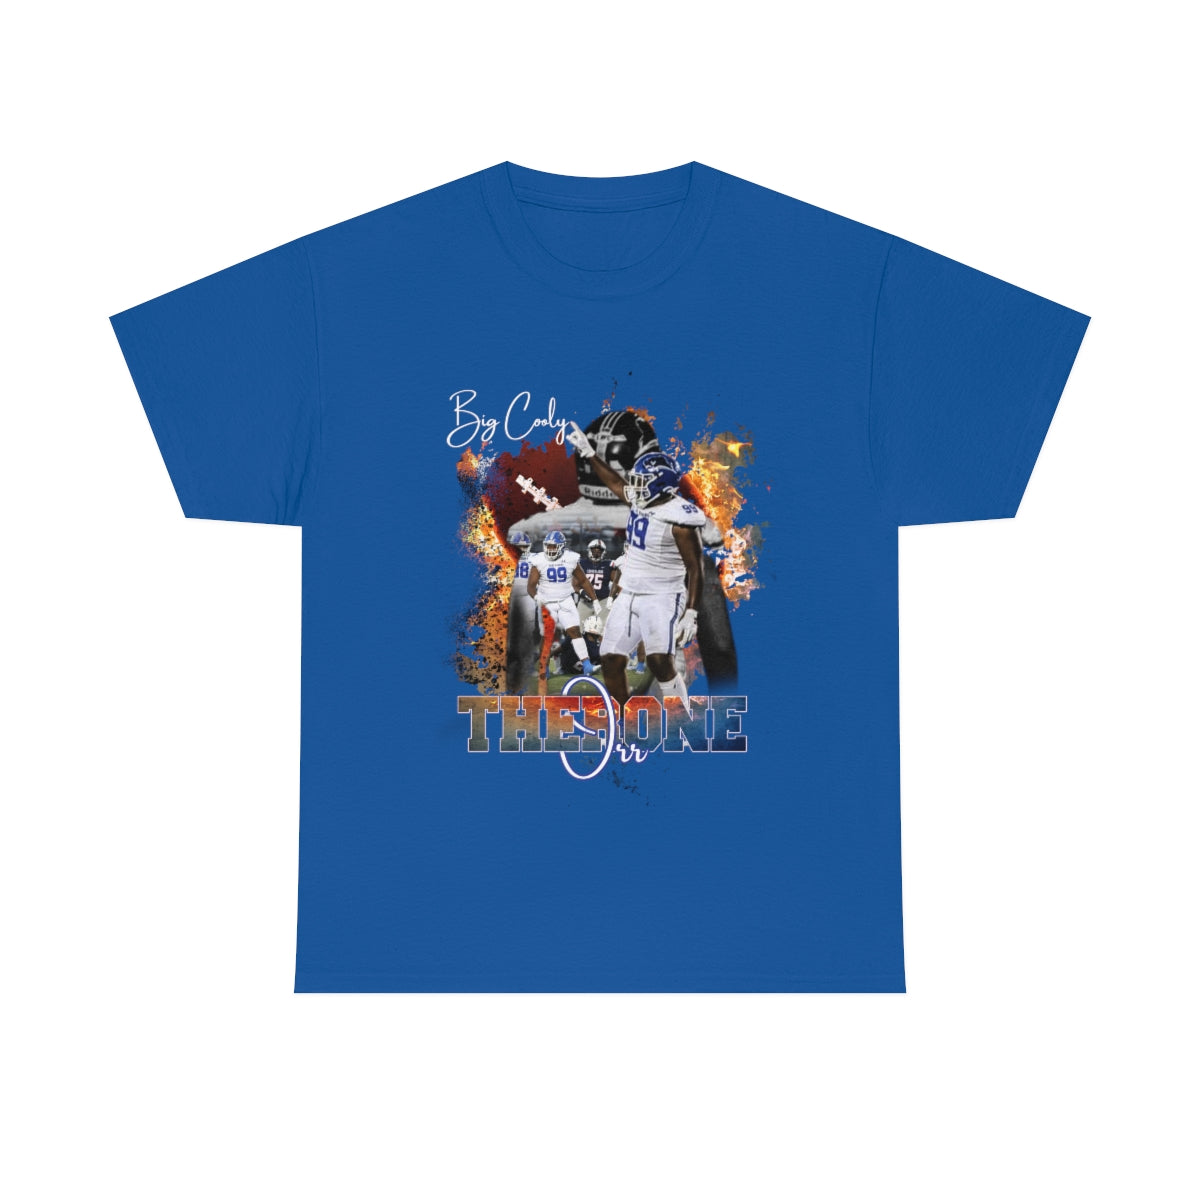 Therone Orr Graphic Tee